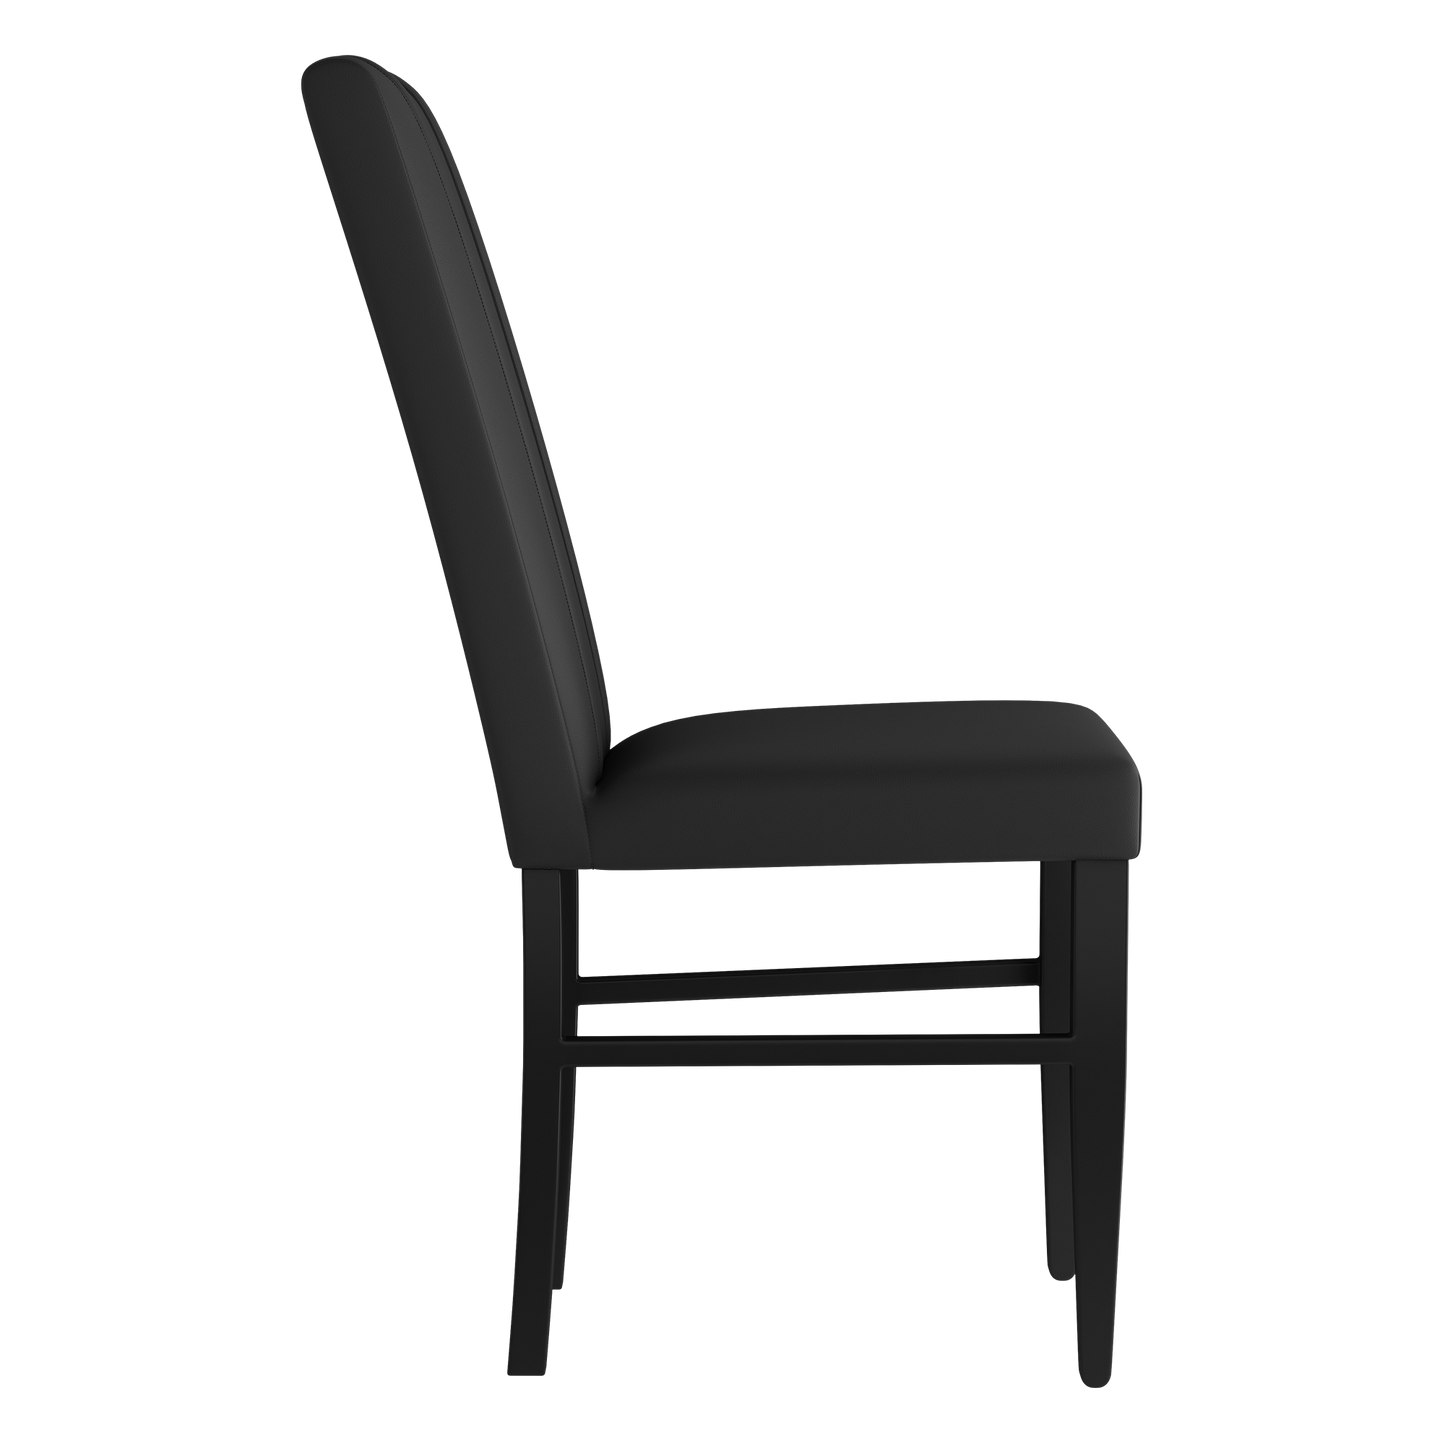 Side Chair 2000 with Cincinnati Reds Secondary Set of 2